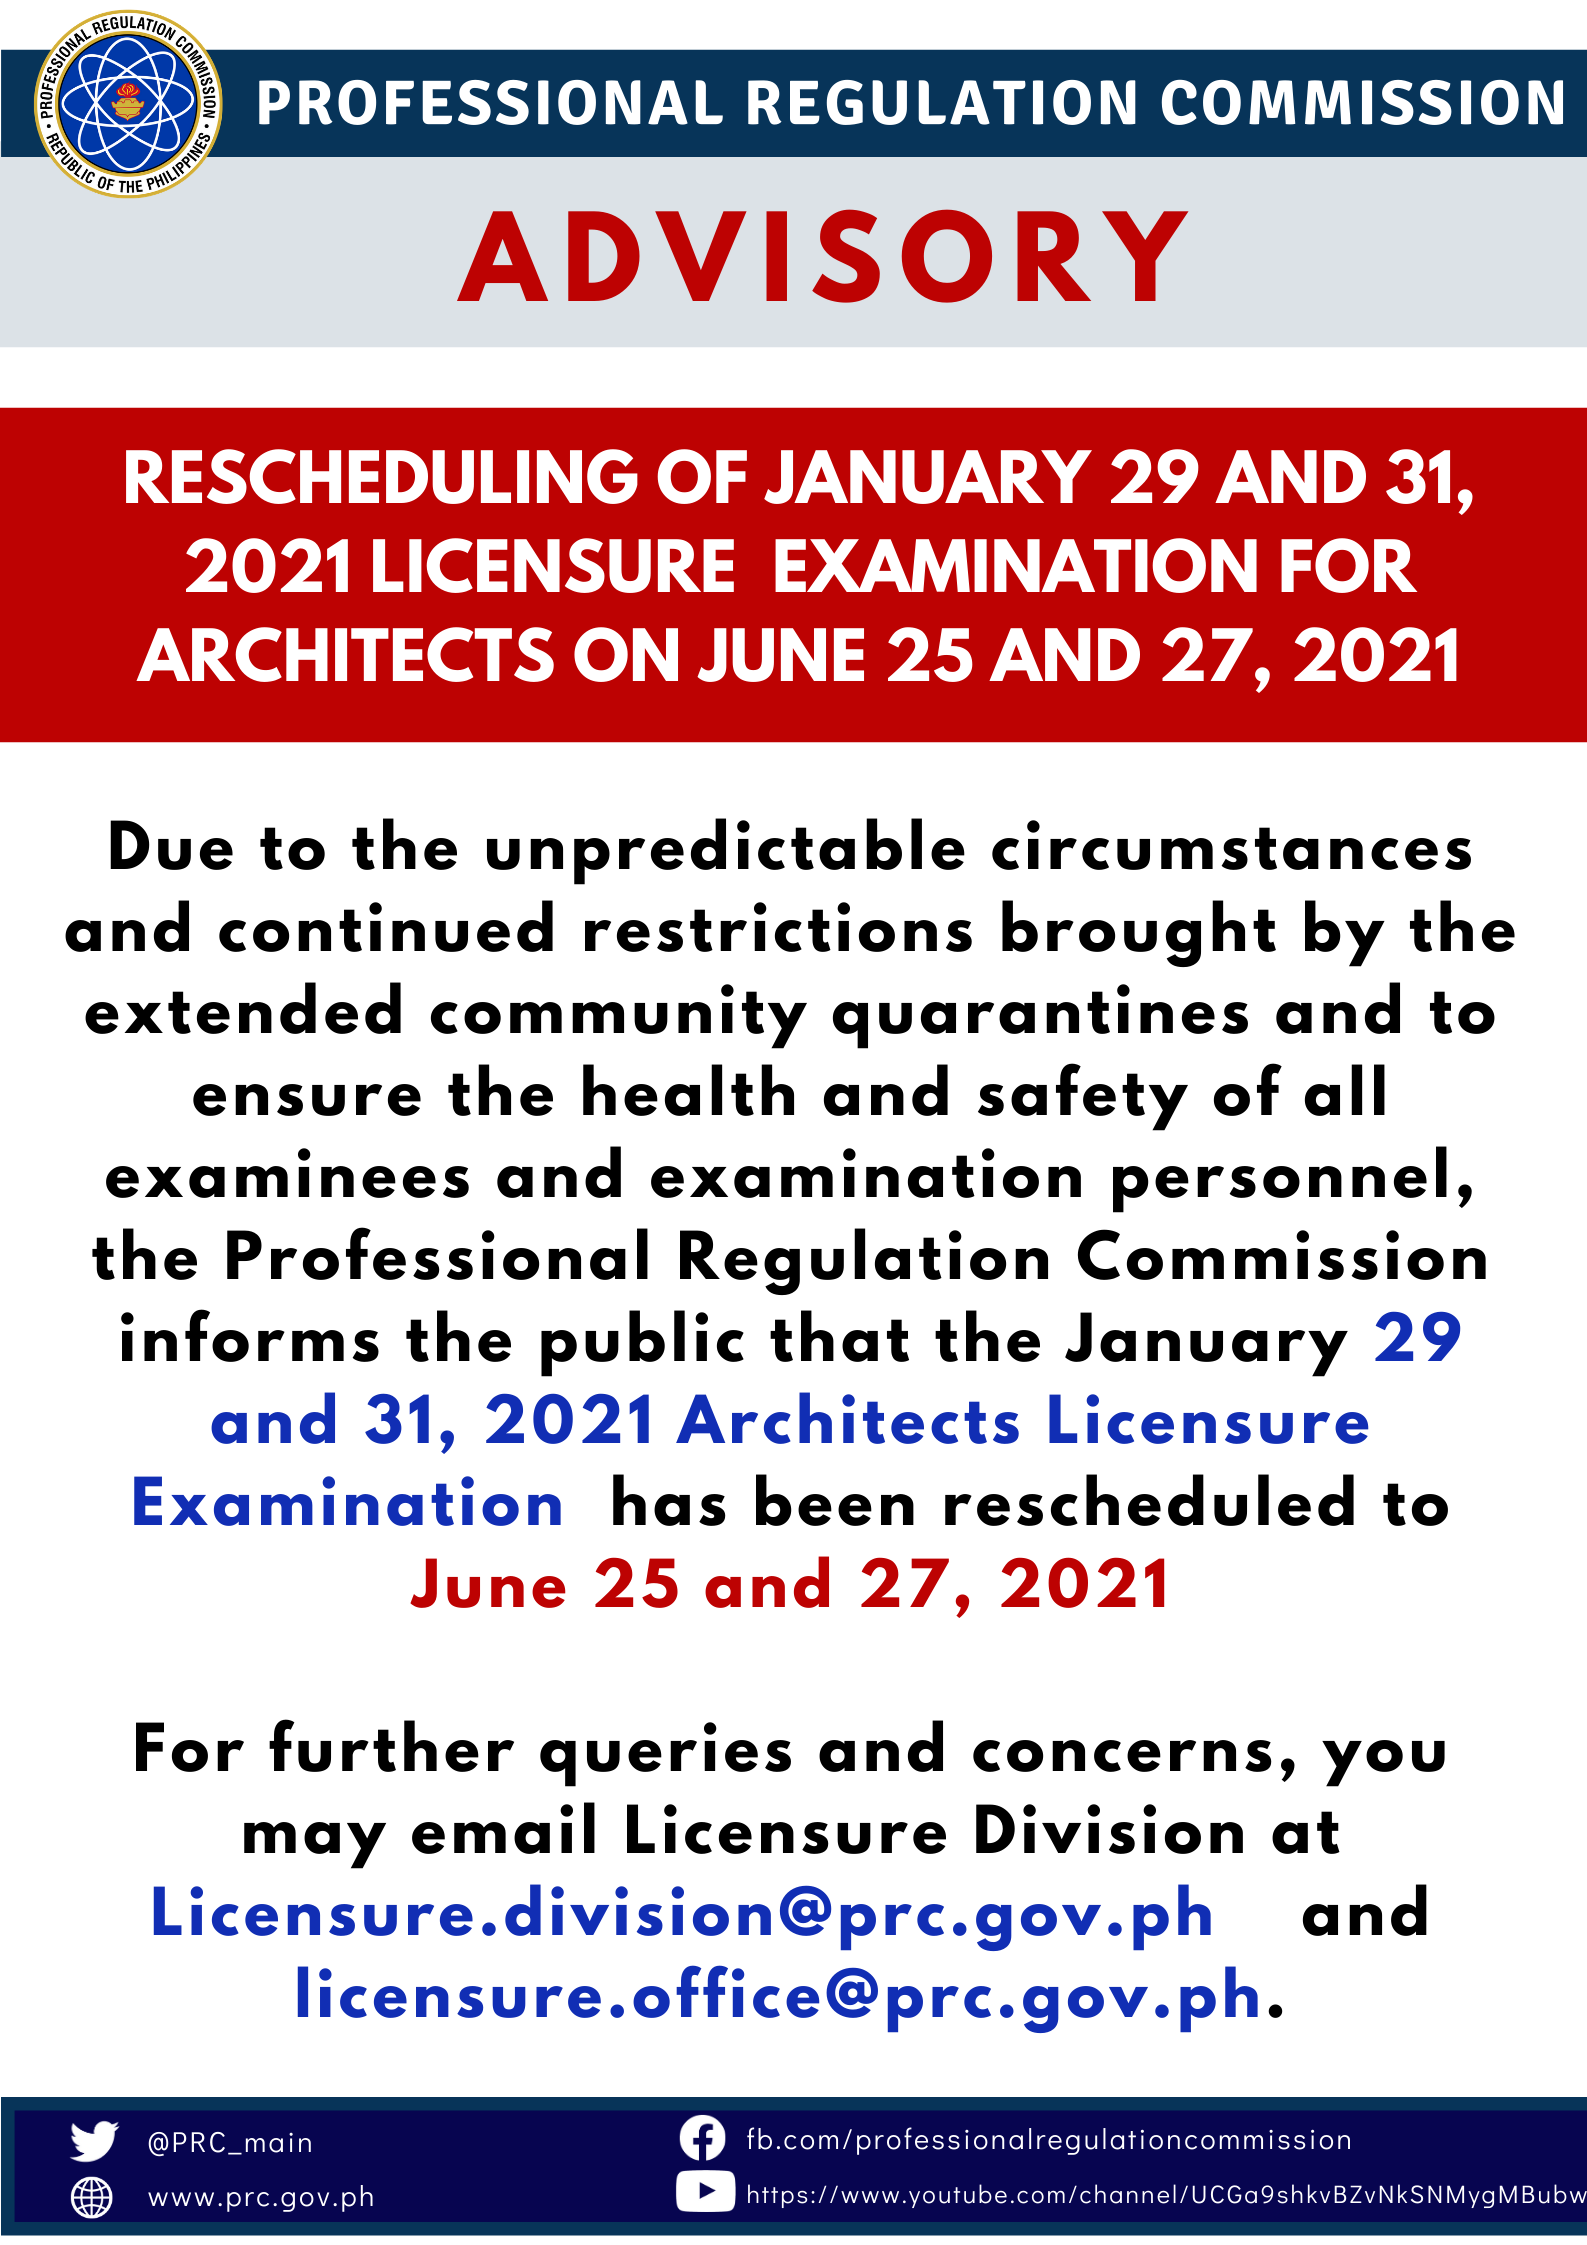 Rescheduling of January 29 and 31, 2021 Licensure Examination for